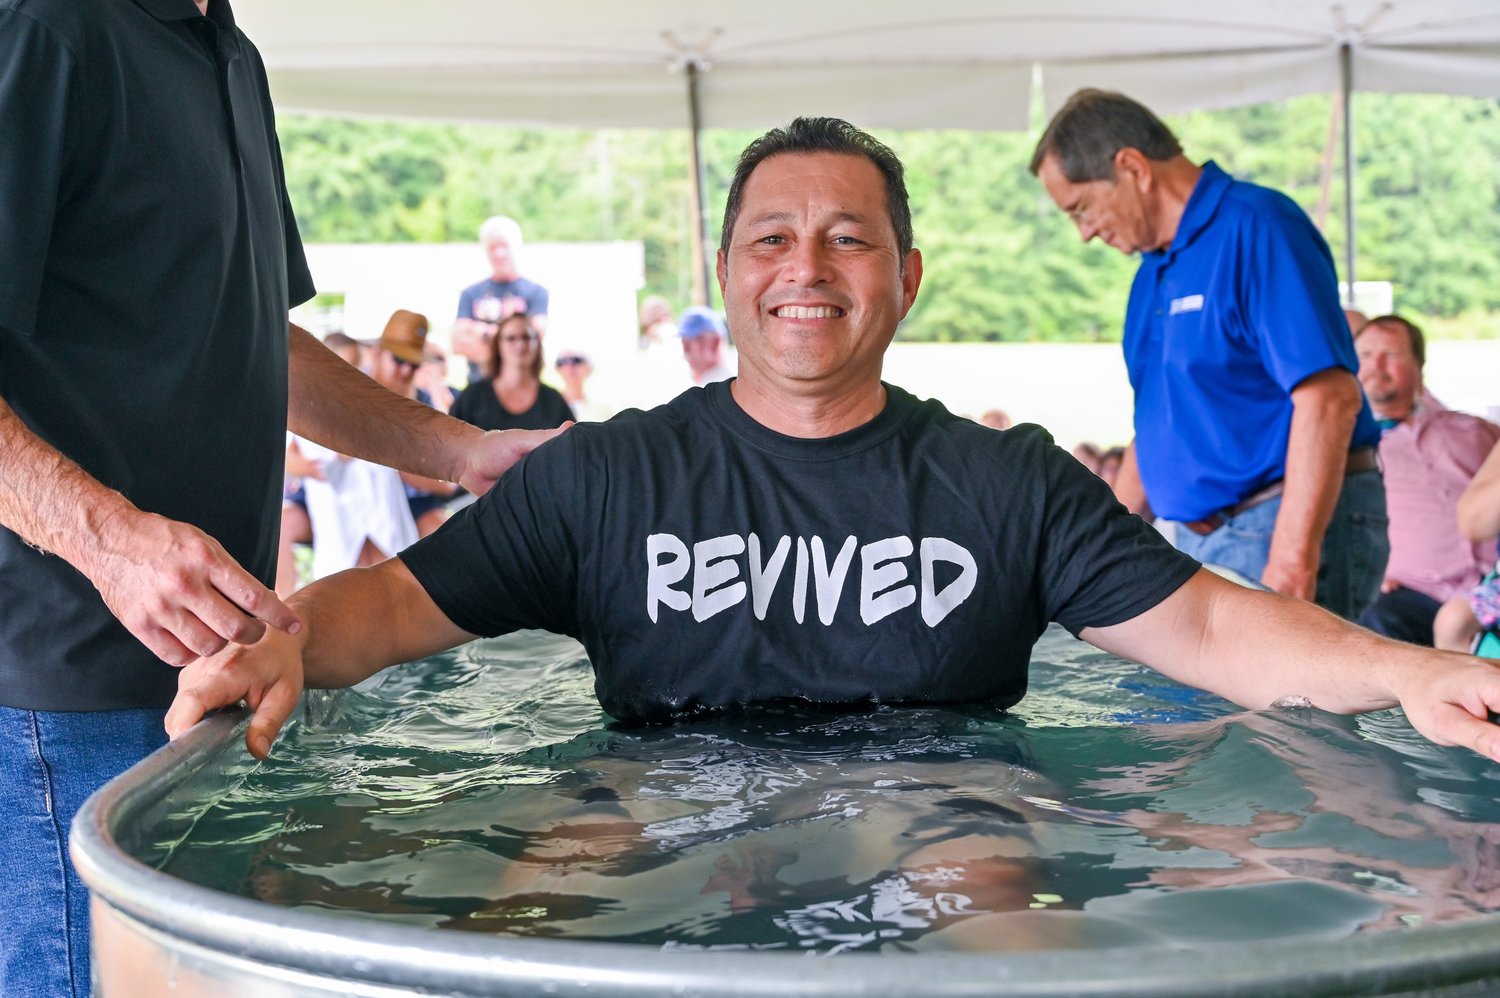 New Hope Baptist Church sees 40 baptisms in 40 days The Christian Index